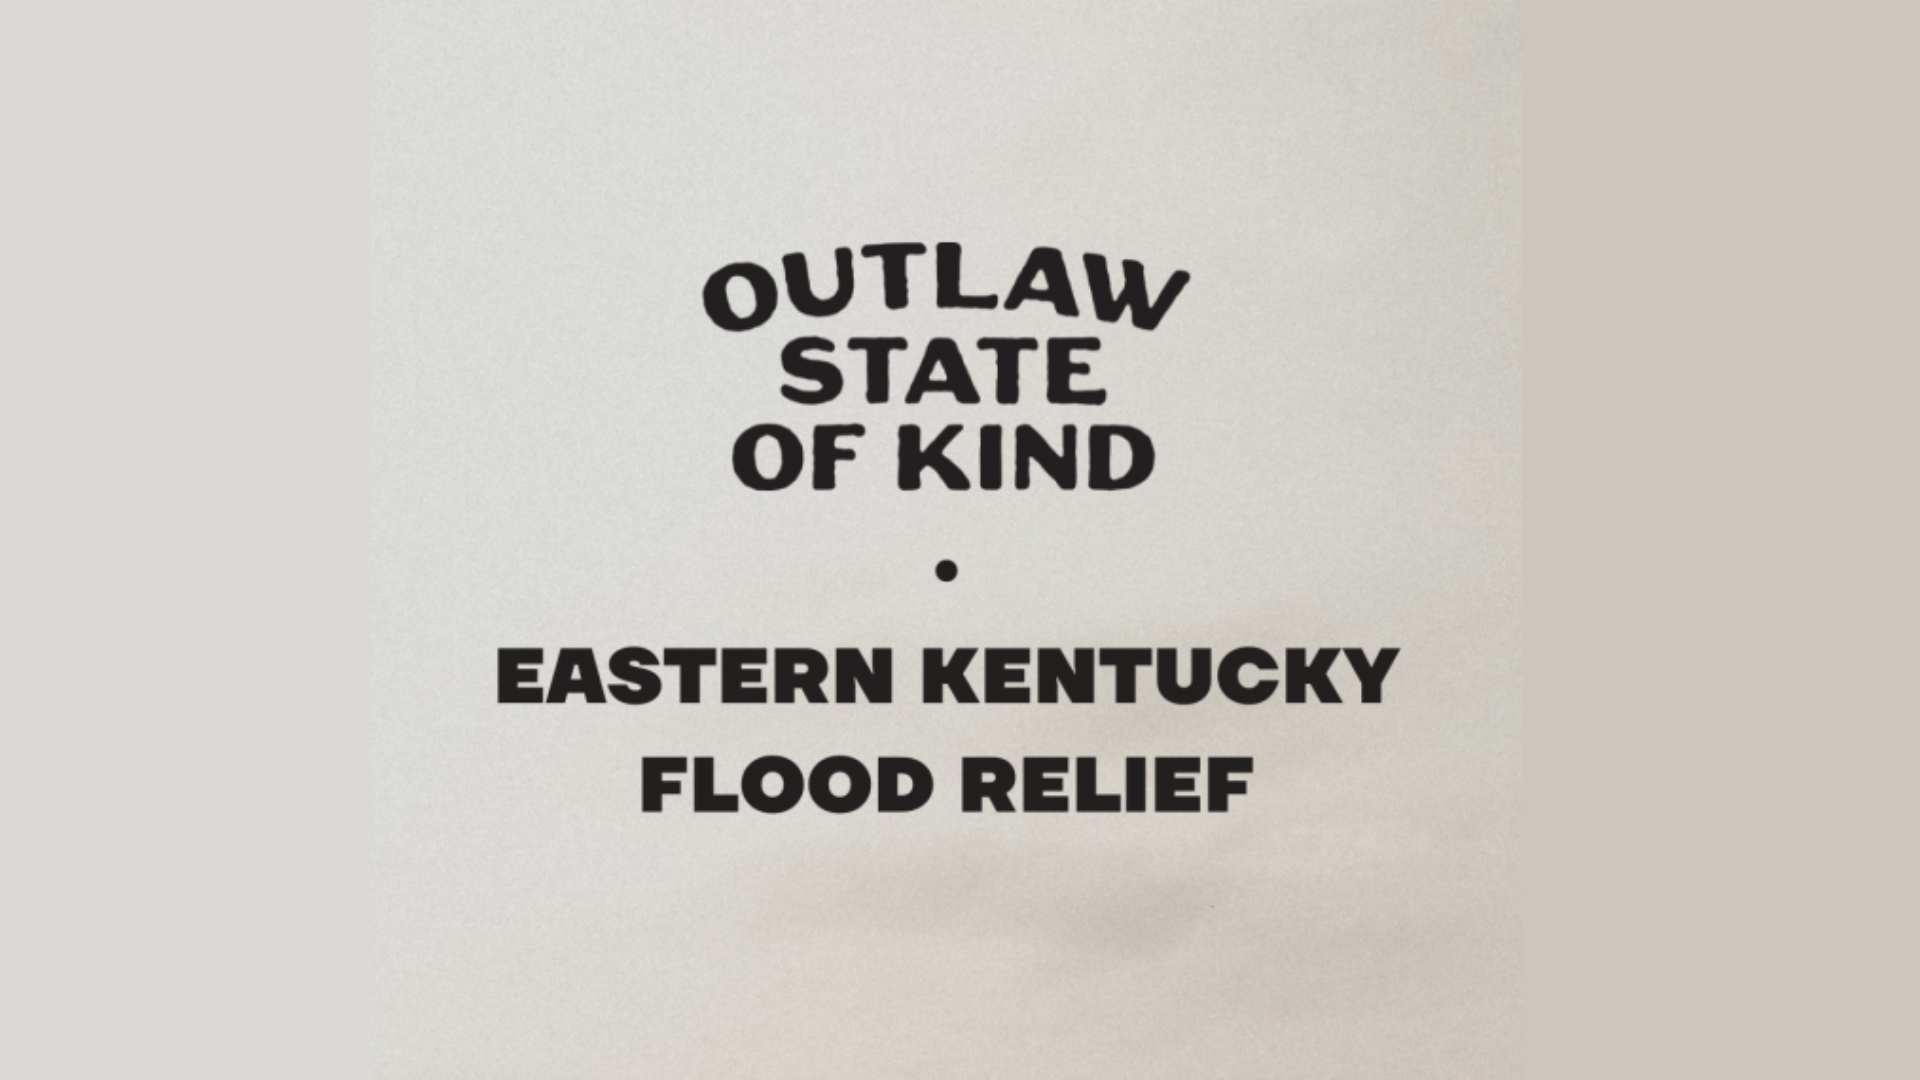 Kentucky Native Chris Stapleton Raising Funds to Help Those Impacted by the Historic Floods in His Home State